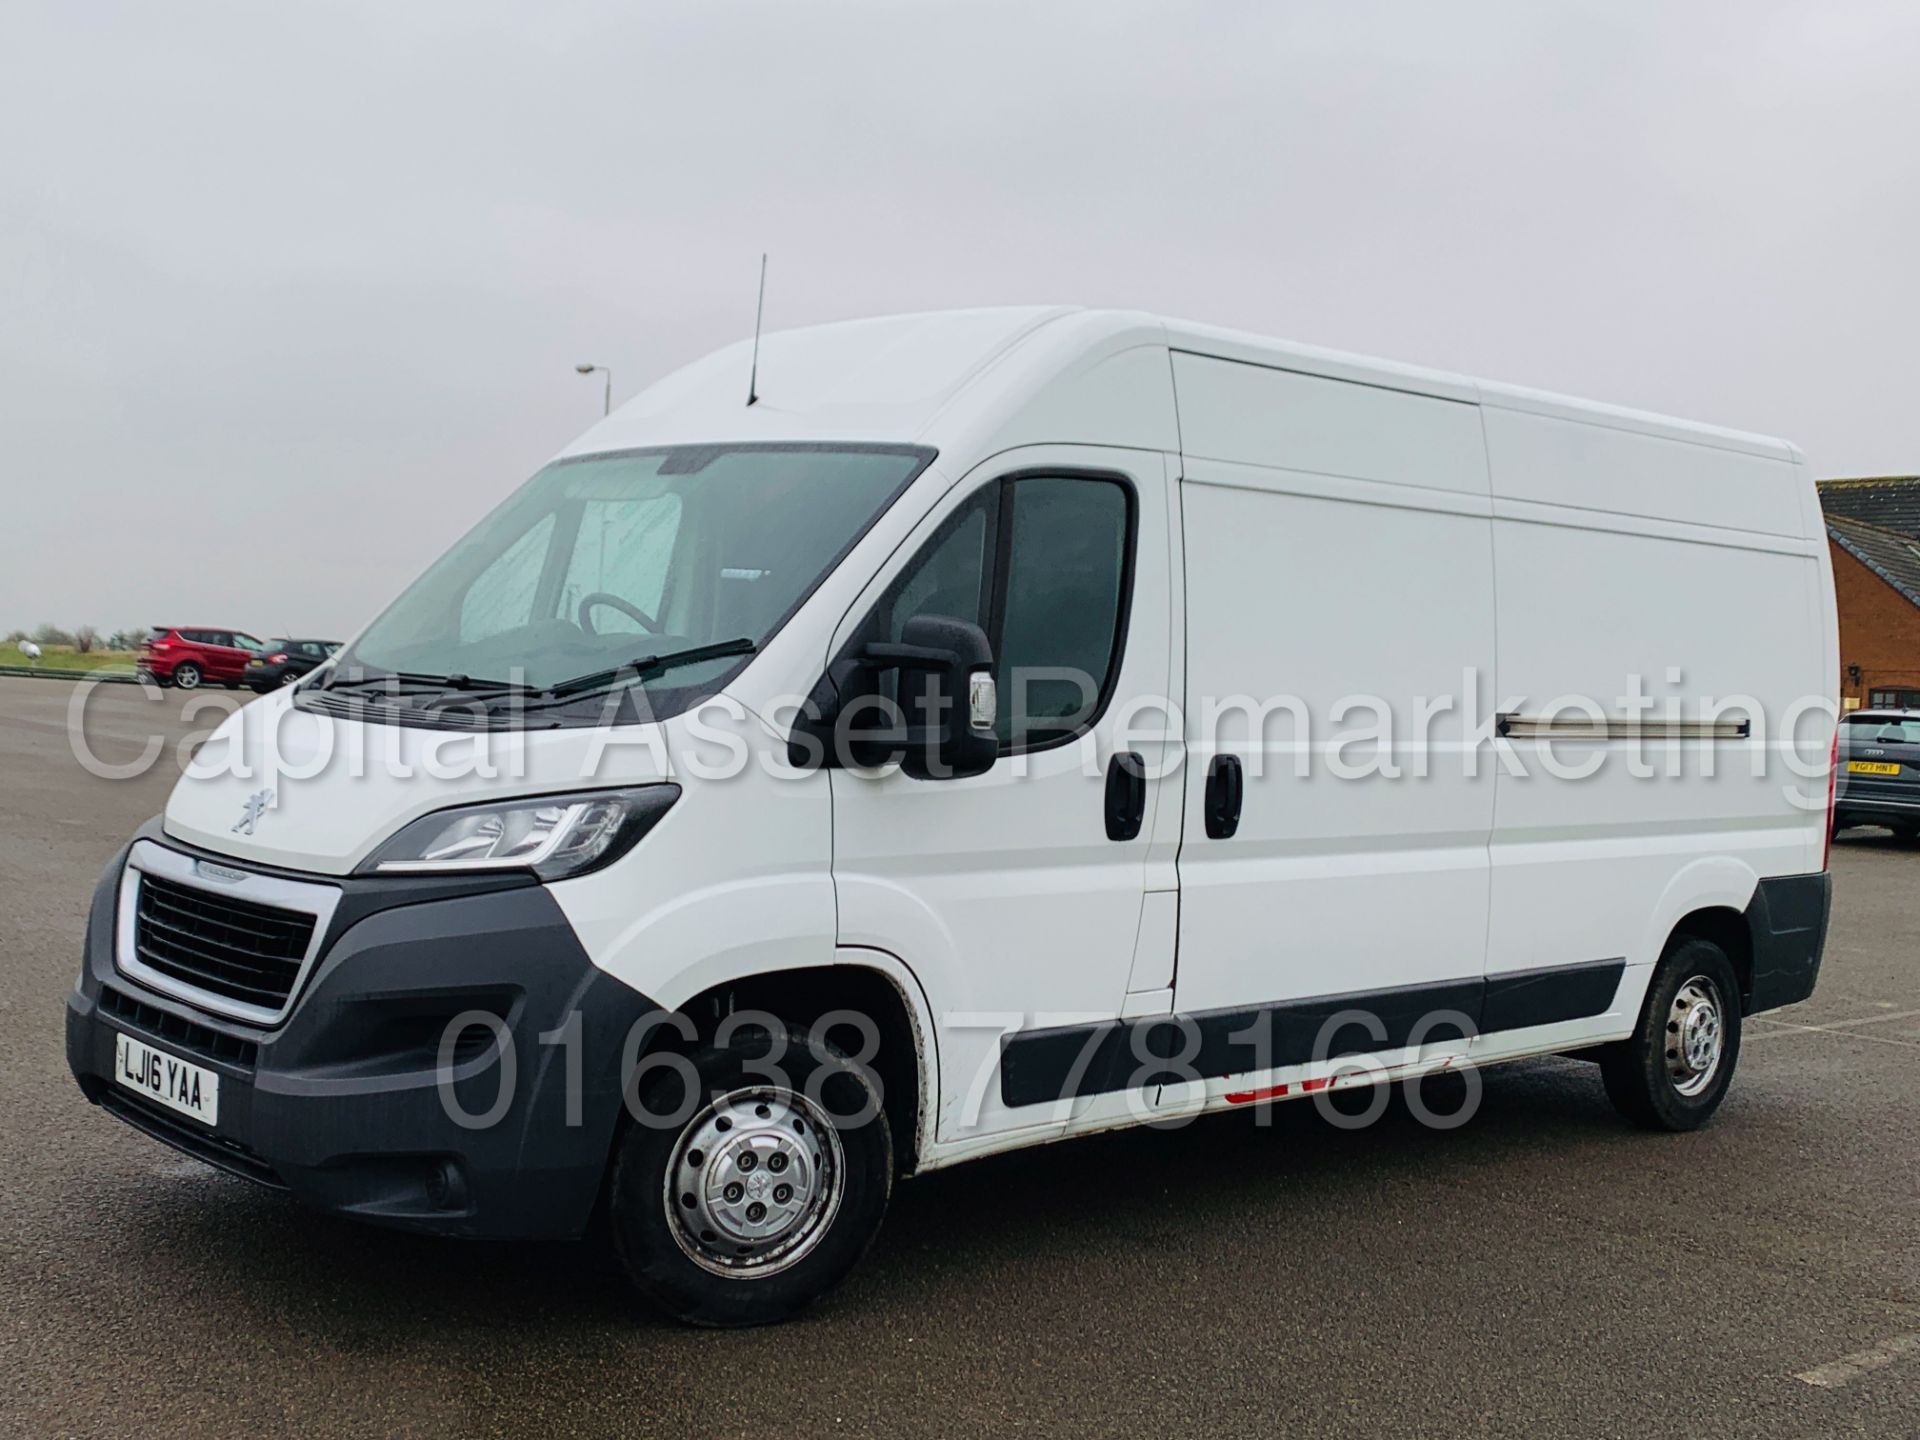 (On Sale) PEUGEOT BOXER *PROFESSIONAL* LWB HI-ROOF (2016) '2.2 HDI - 6 SPEED' *SAT NAV & AIR CON* - Image 5 of 33